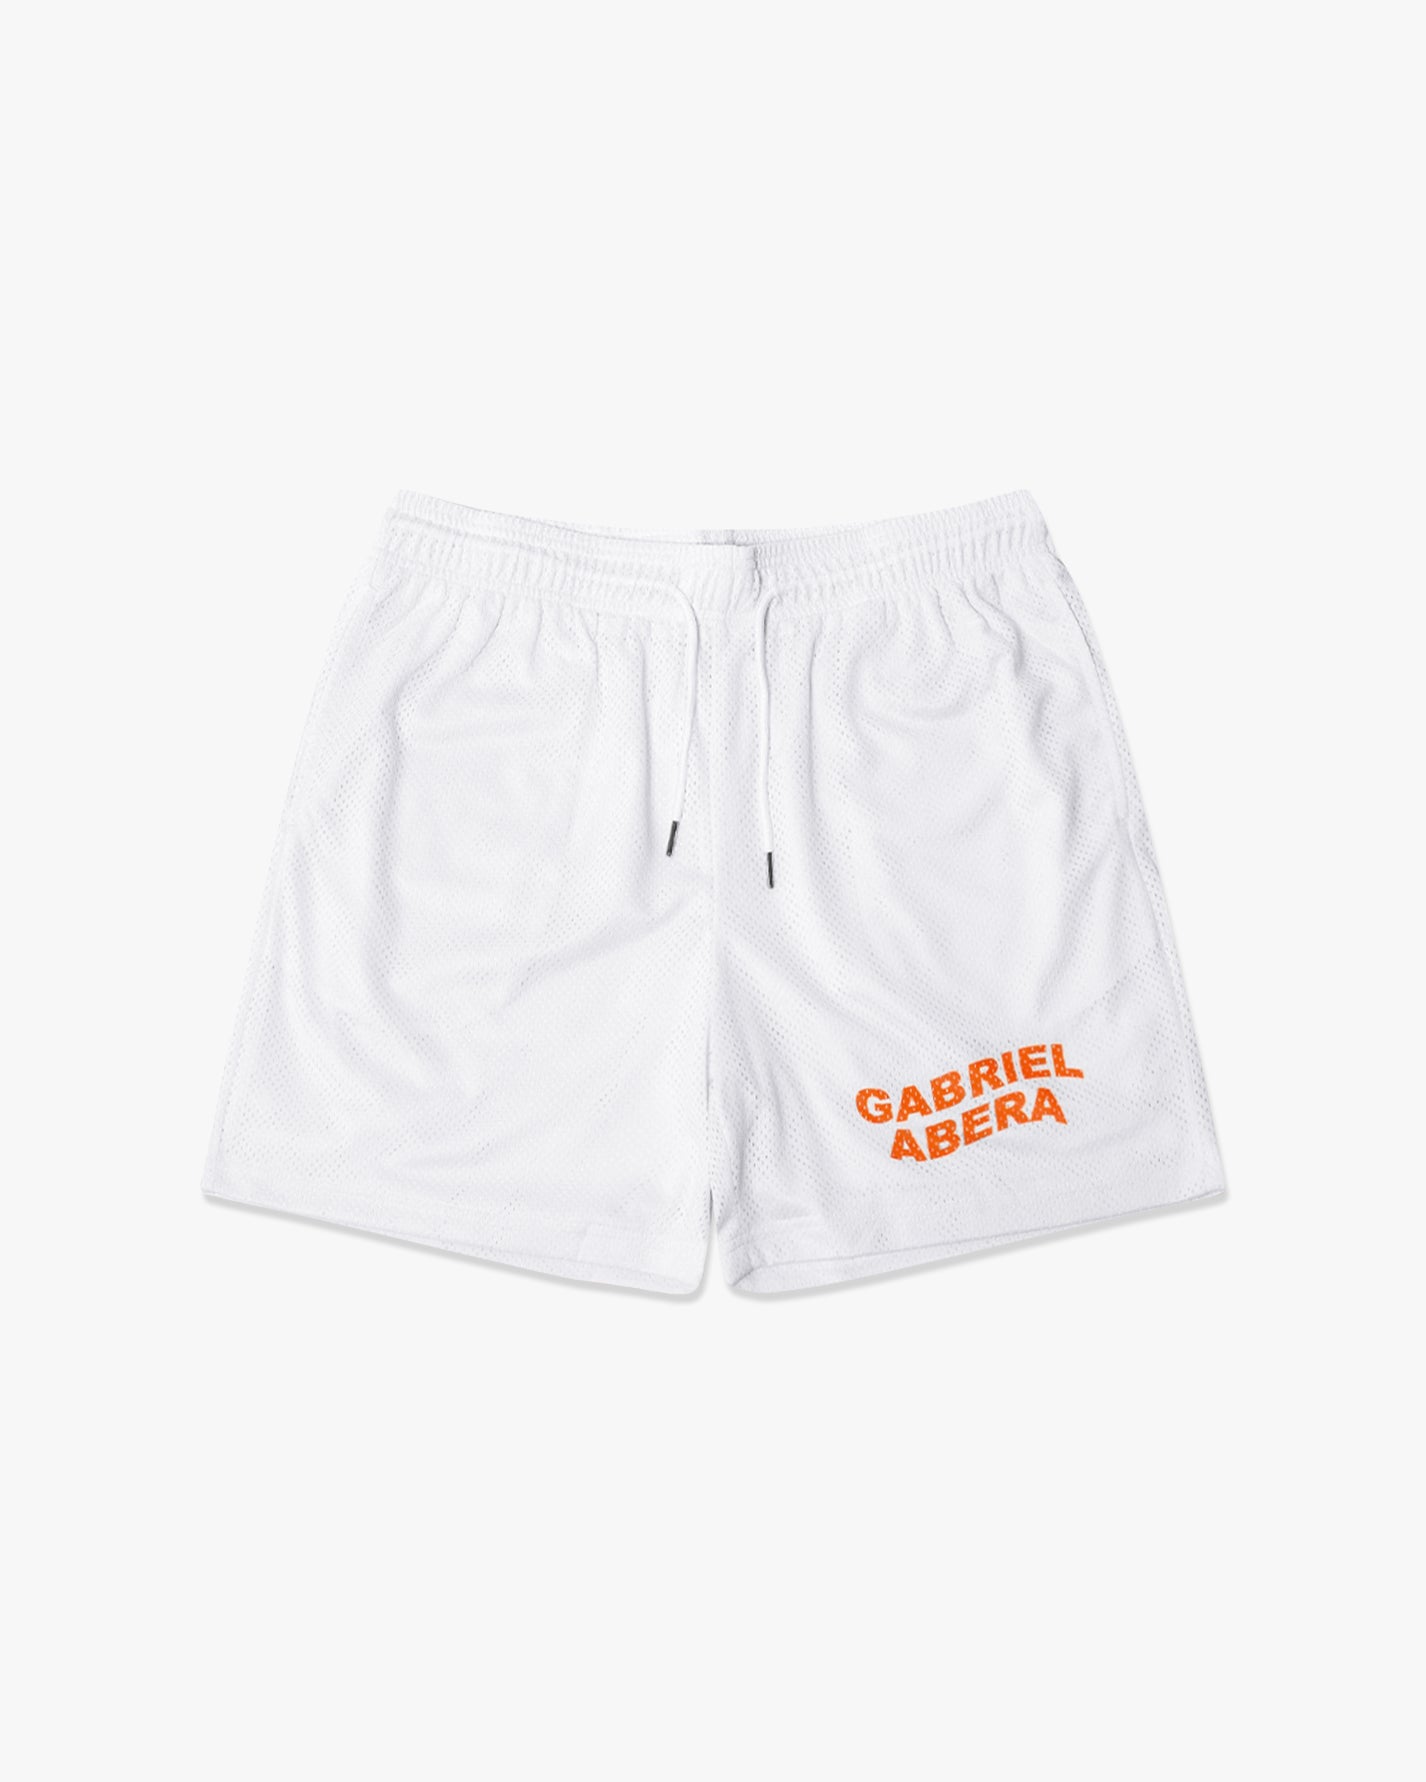 white mesh shorts with orange brand name print in the front